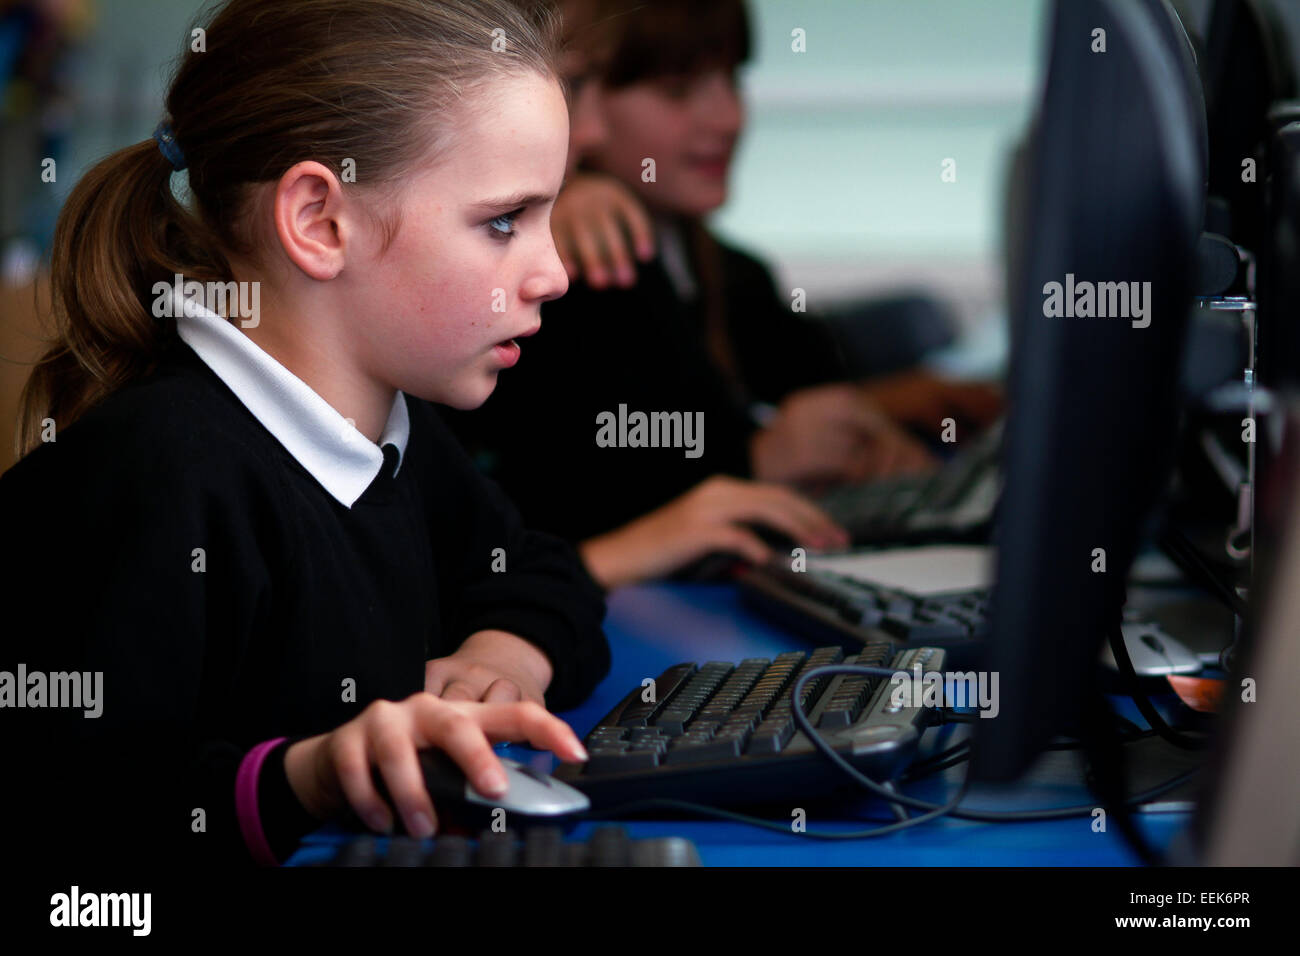 Girl in UK secondary school learning coding on computer Stock Photo